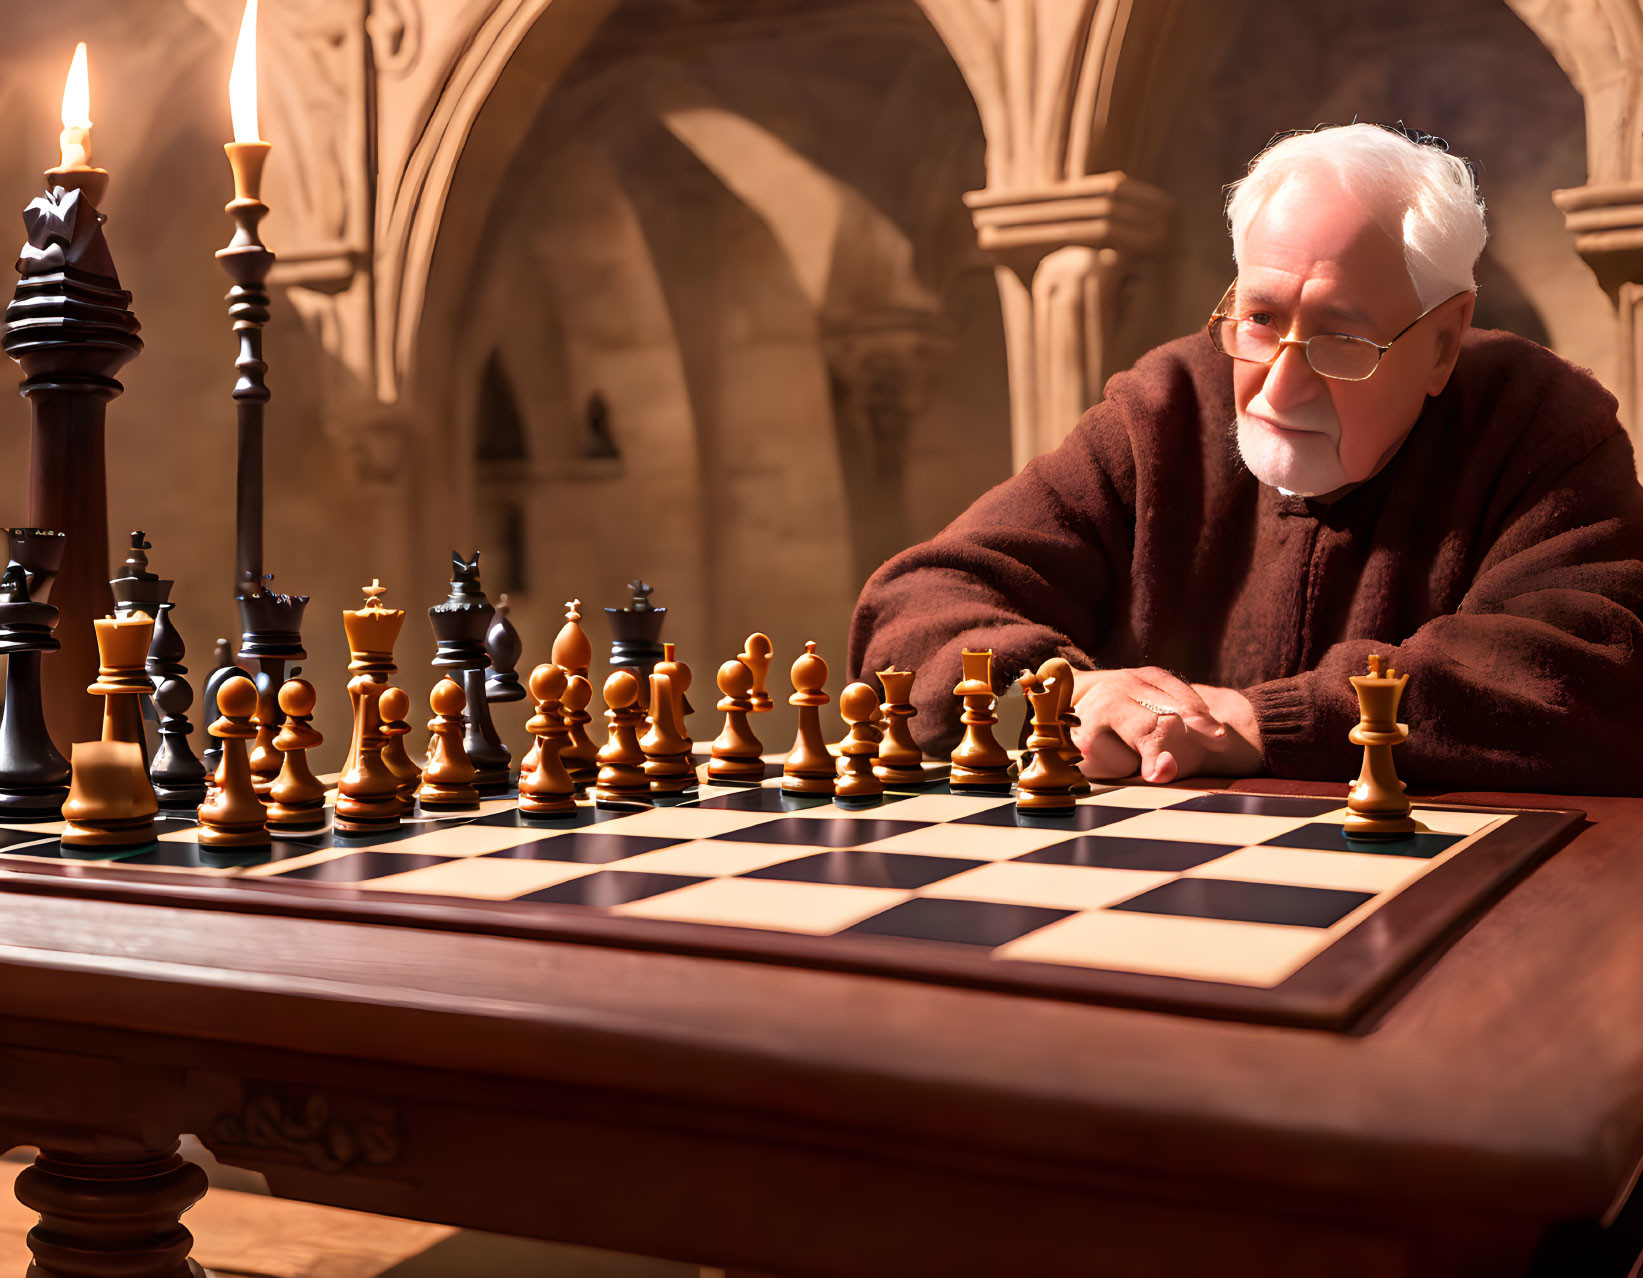 Elderly Man Contemplating Chess Move in Candlelit Room